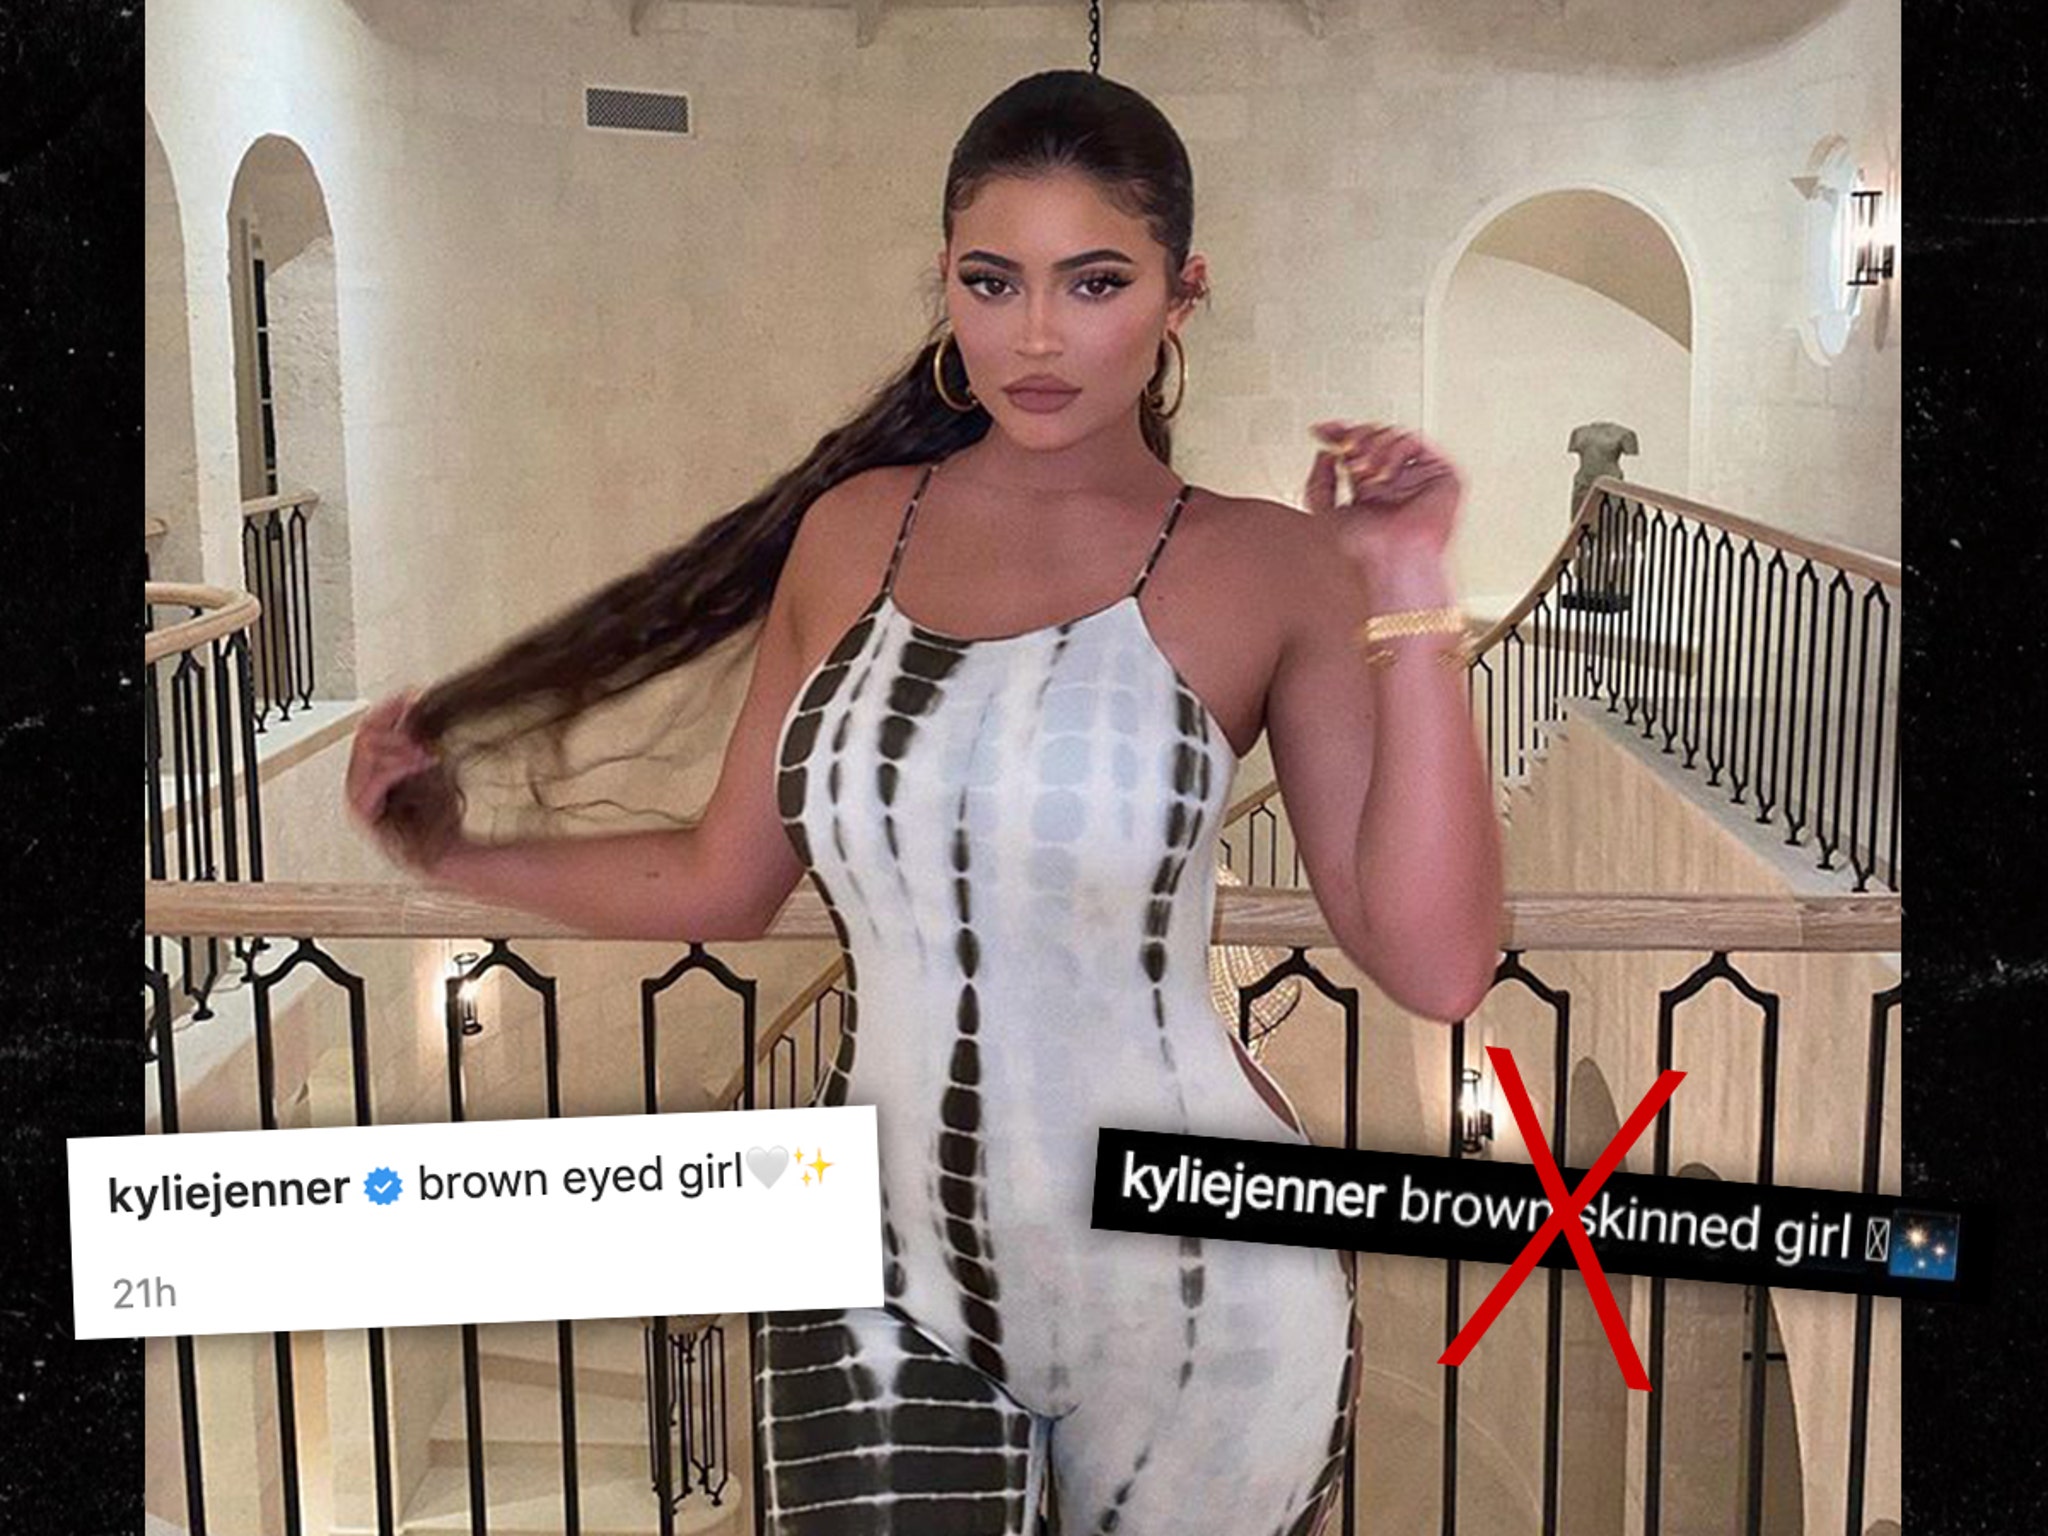 Kylie Jenner Calls Out Fake Caption on Instagram: I Never Said This